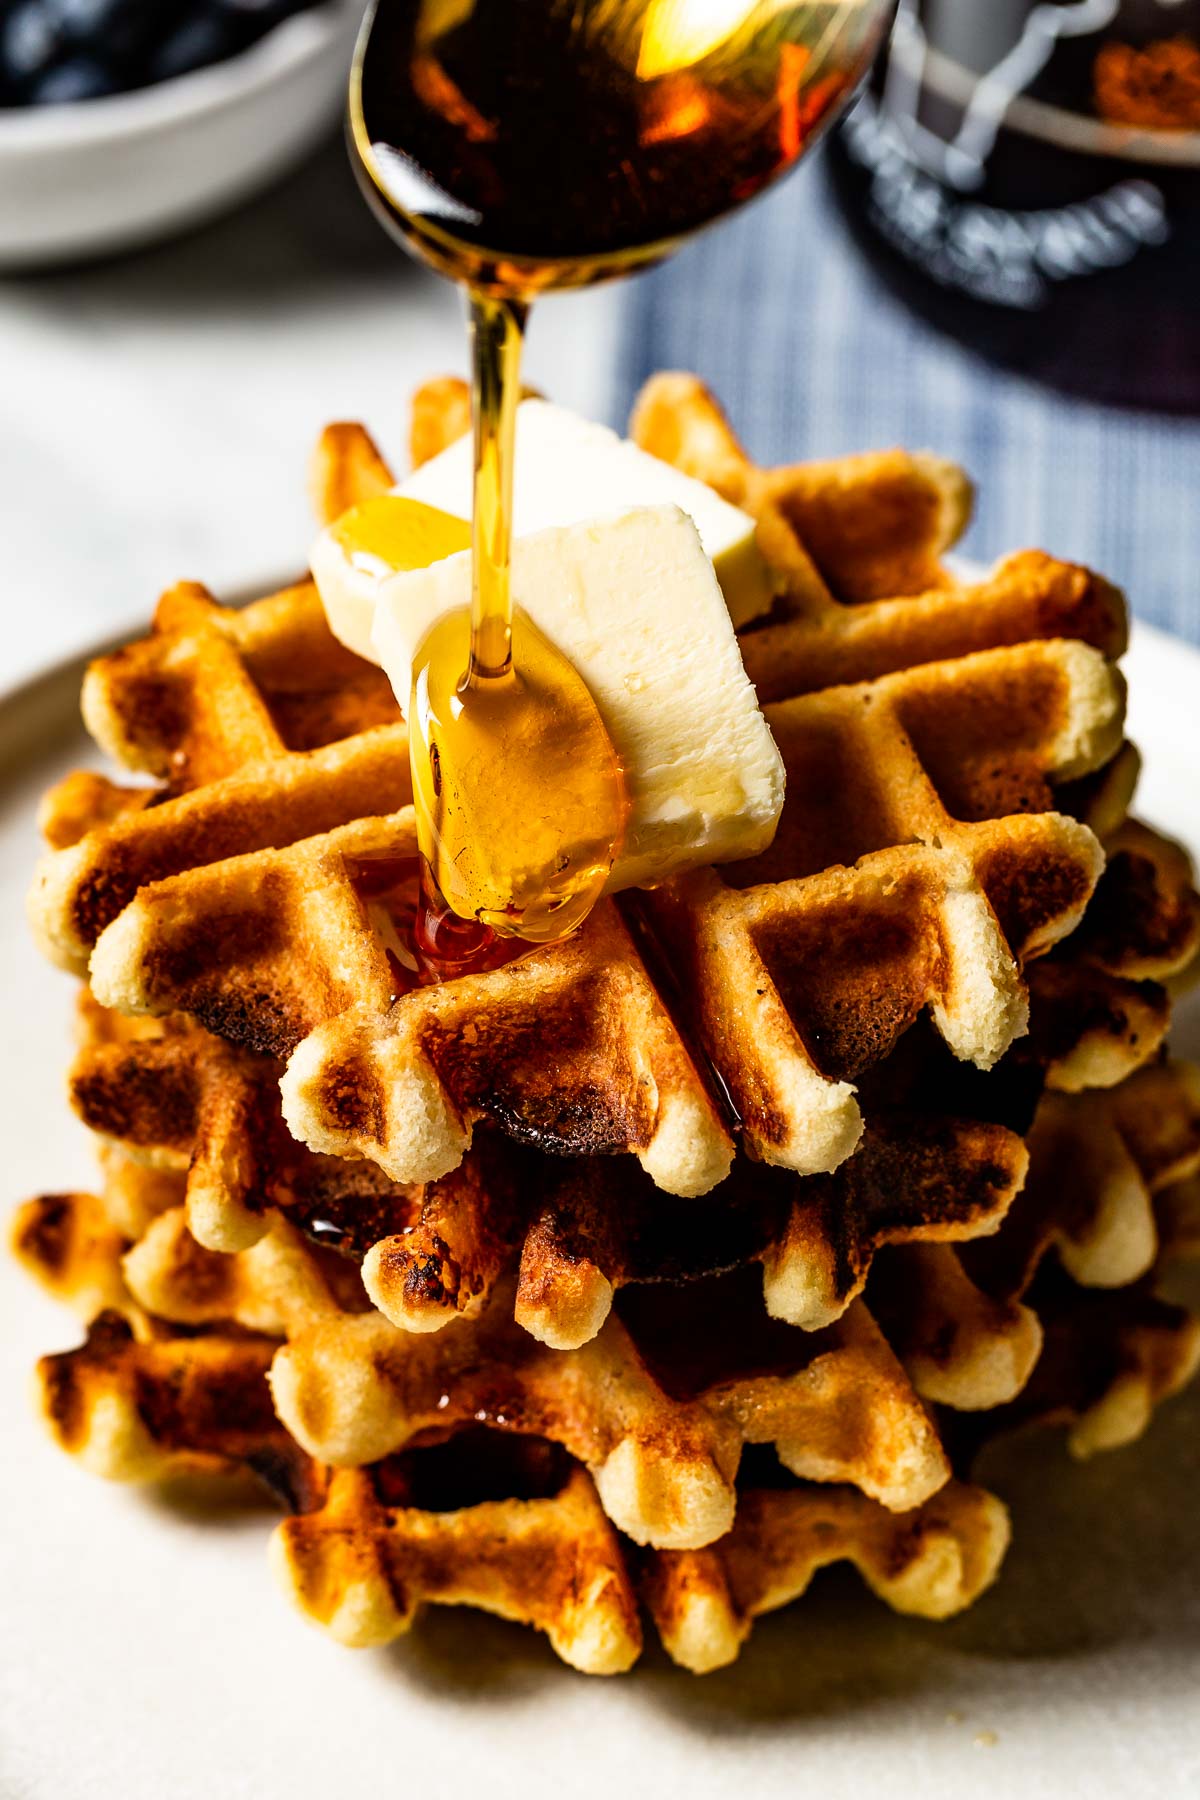 Almond flour waffles topped off with butter and being drizzled with syrup